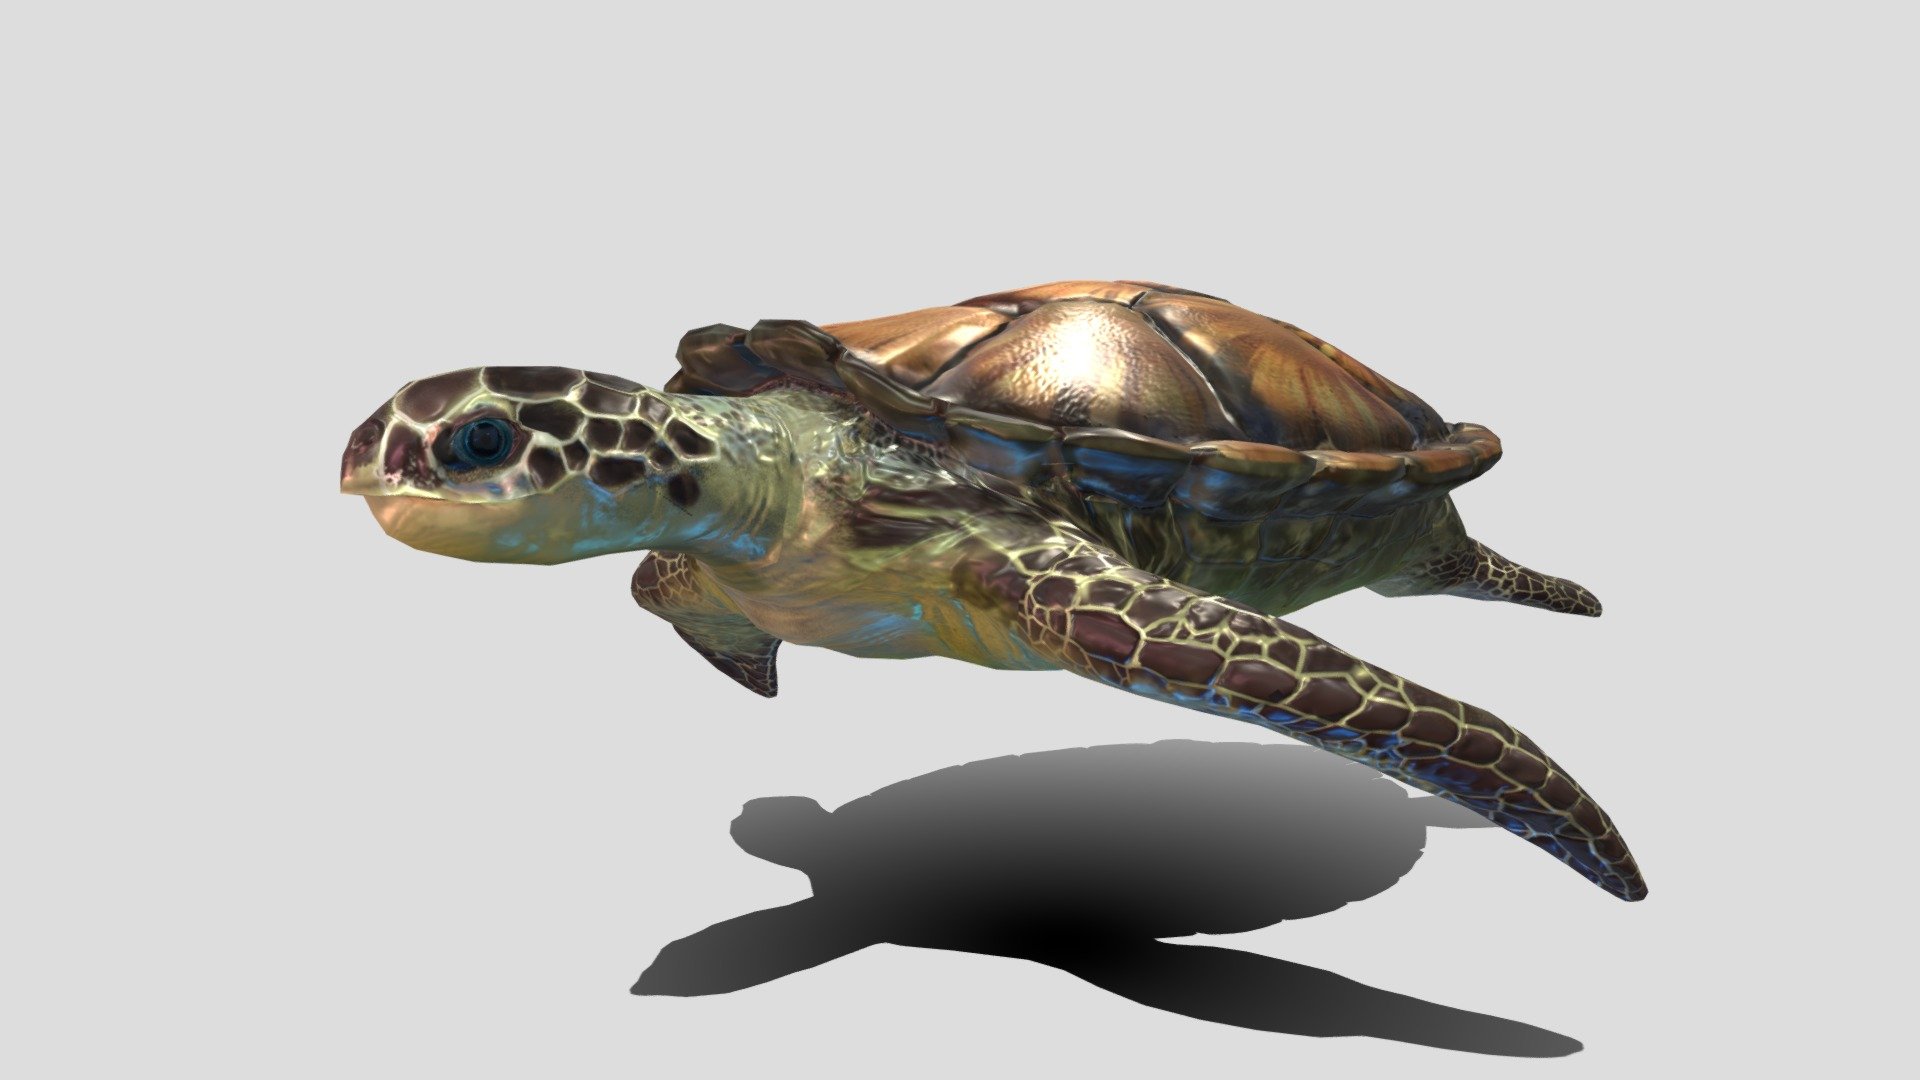 A low poly Sea Turtle PBR style I’ve made with blender 2.9 , uv wrapped it manually and animated it with standard bones .

i make a remodel of this one go see it and maybe you like it :) https://sketchfab.com/3d-models/sea-turtle-80d2430c48c94108af8176a004d48246

Ii receive any request to make my projects better so it can have better quality  , some advice would be appreciated . Thanks in advance ! - SeaTurtle - 3D model by GoldenZtuff (@dhjwdwd) 3d model